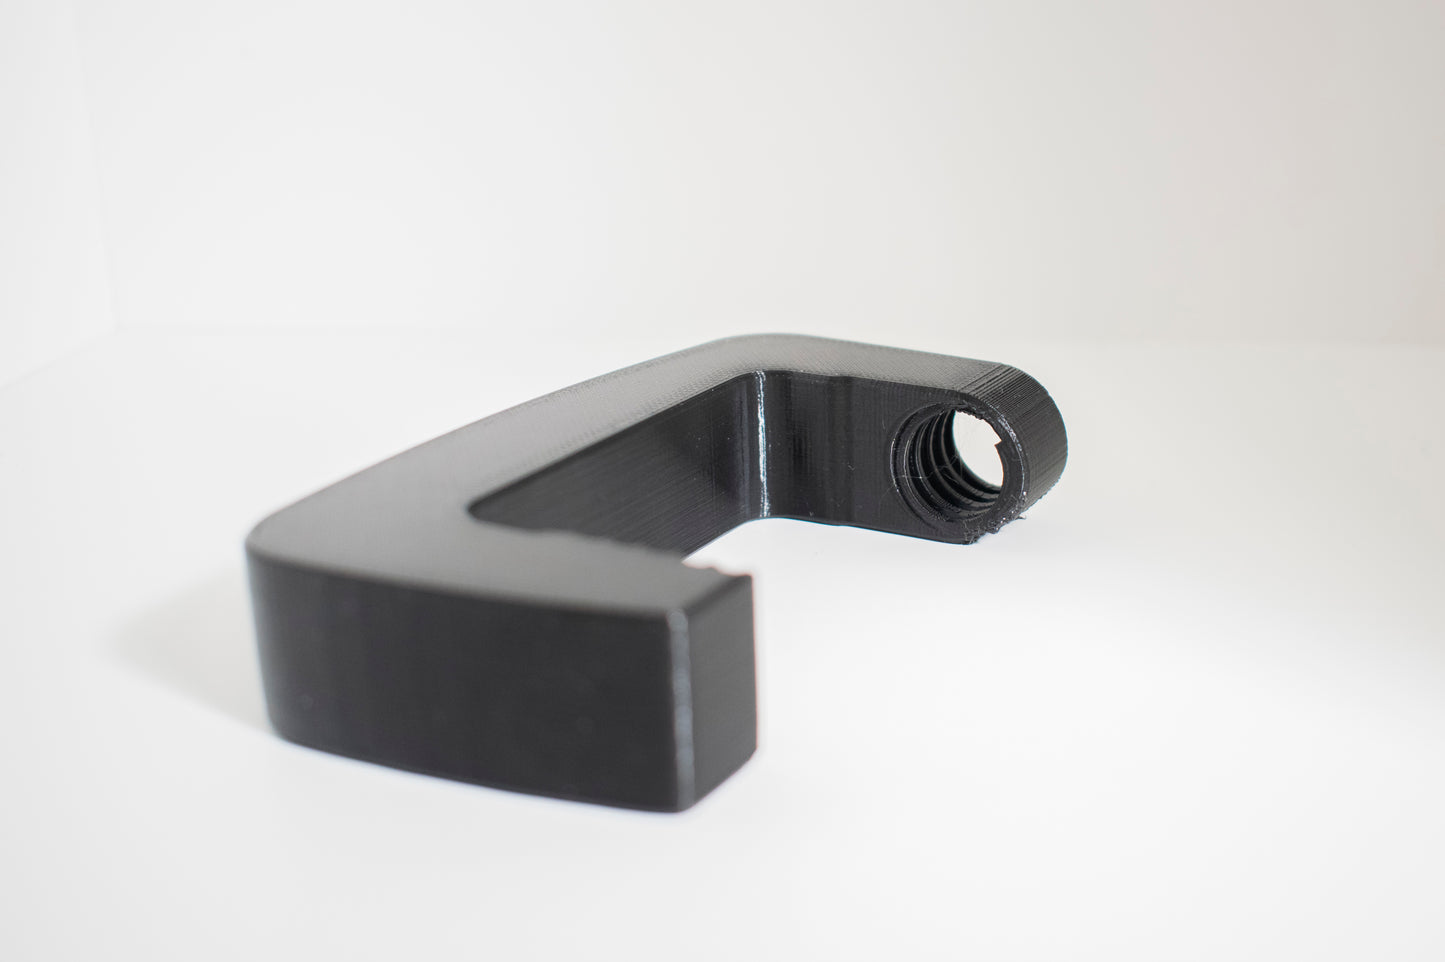 Replacement desk clamp for Logitech G25/G27/G29/G920